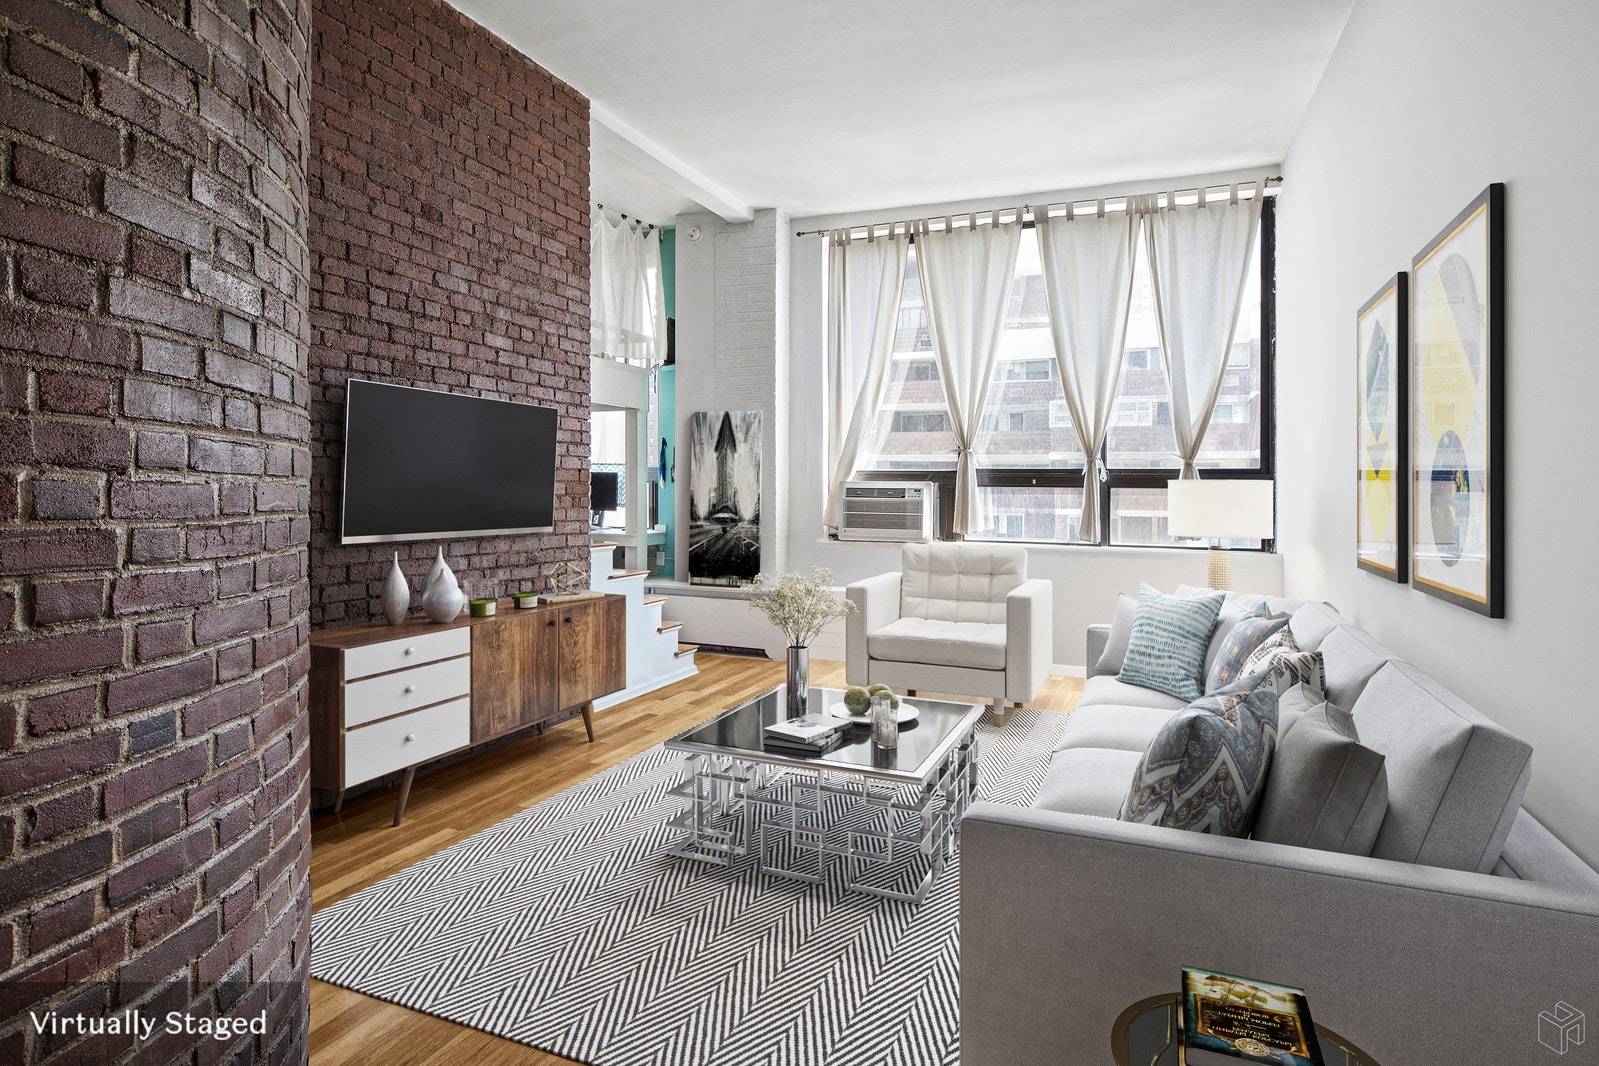 This incredibly spacious alcove loft studio apartment features a flexible floor plan featuring soaring 11 foot ceilings and exposed brick walls.